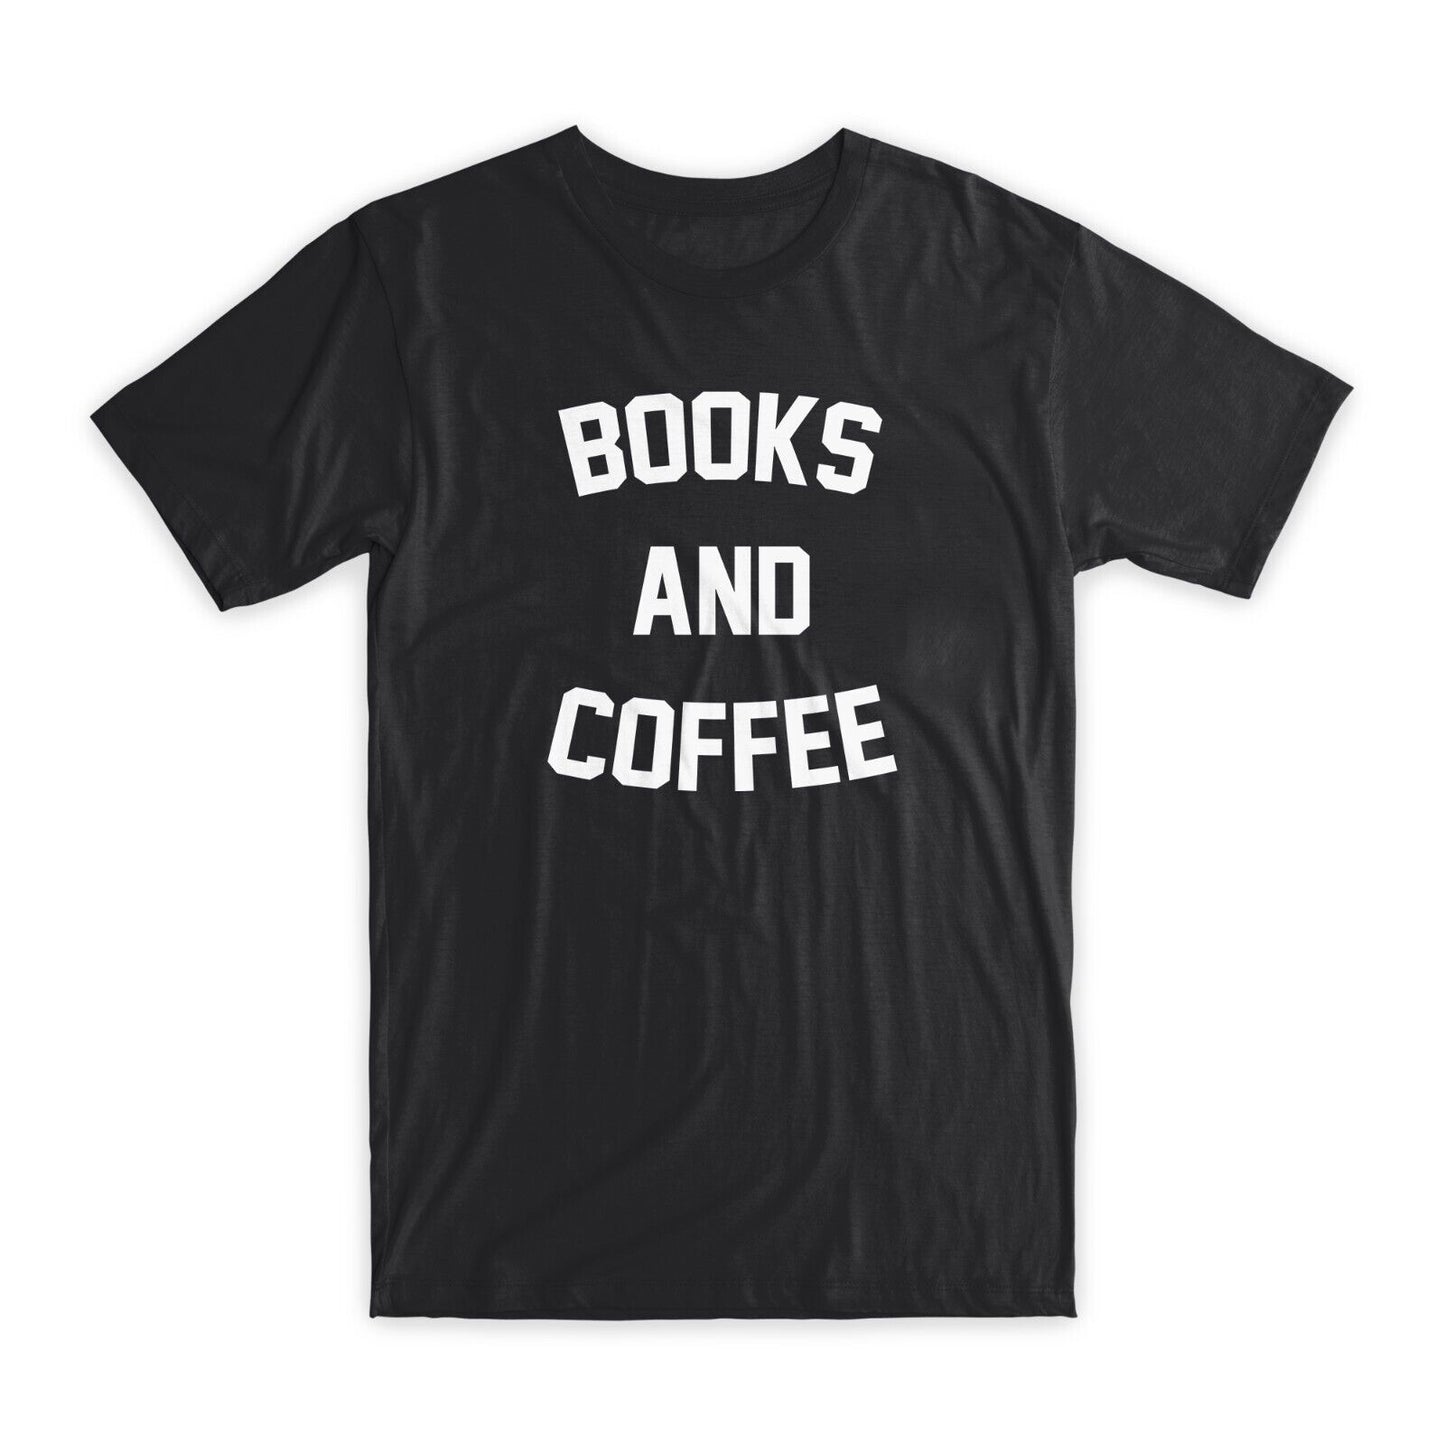 Books and Coffee Print T-Shirt Premium Soft Cotton Crew Neck Funny Tee Gift NEW